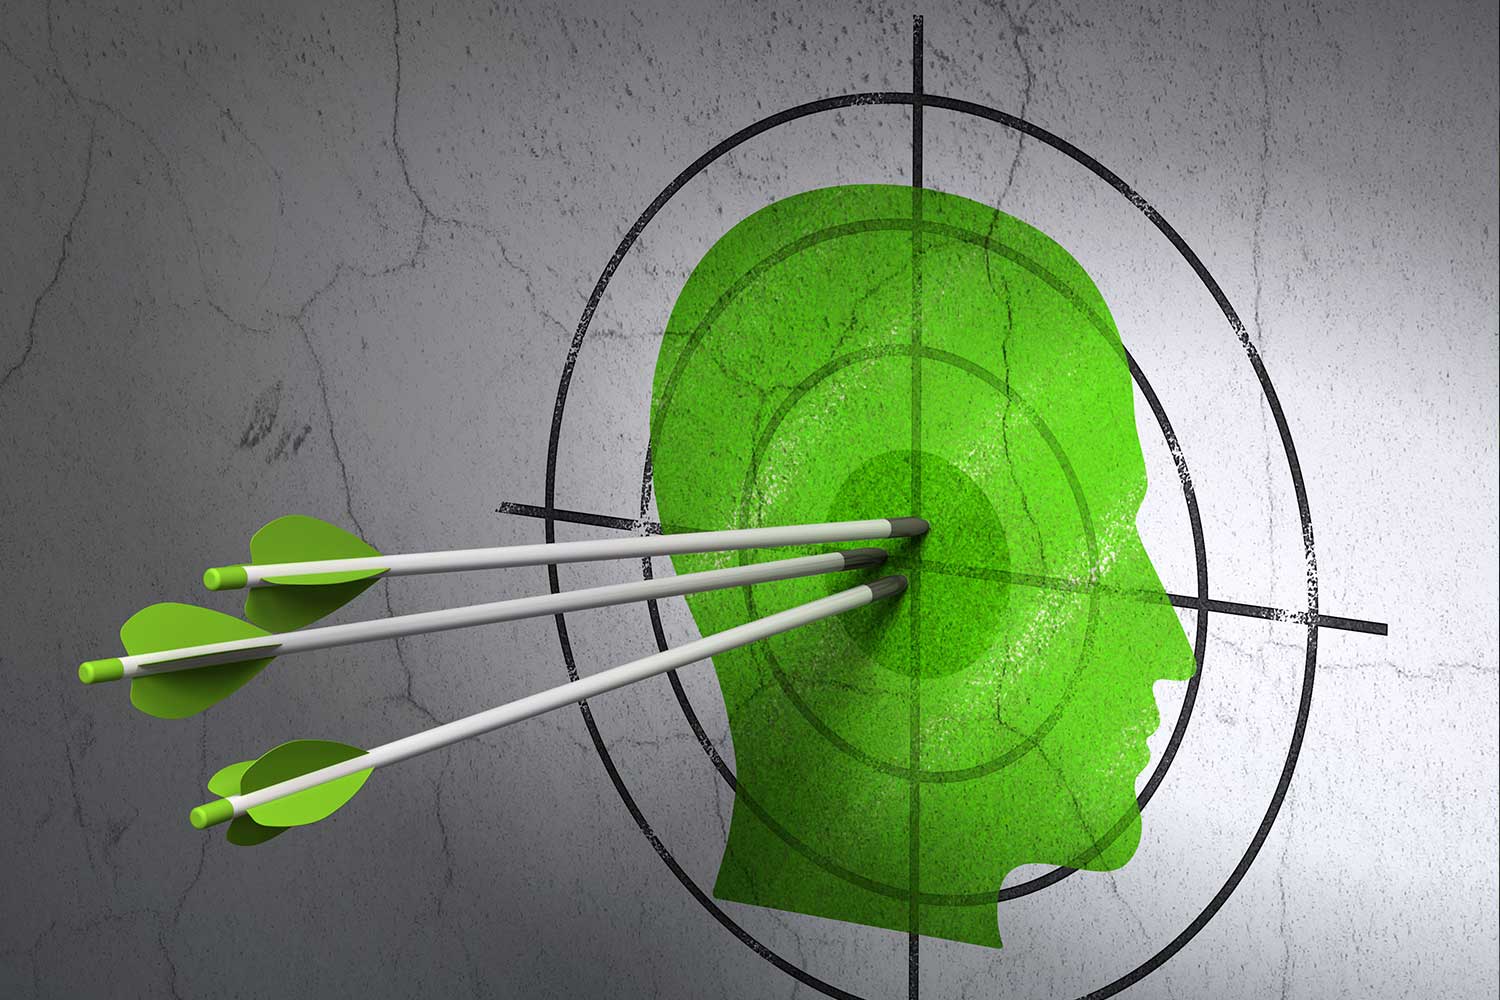 Target with a graphic of a person's head in green with three arrows hitting the center